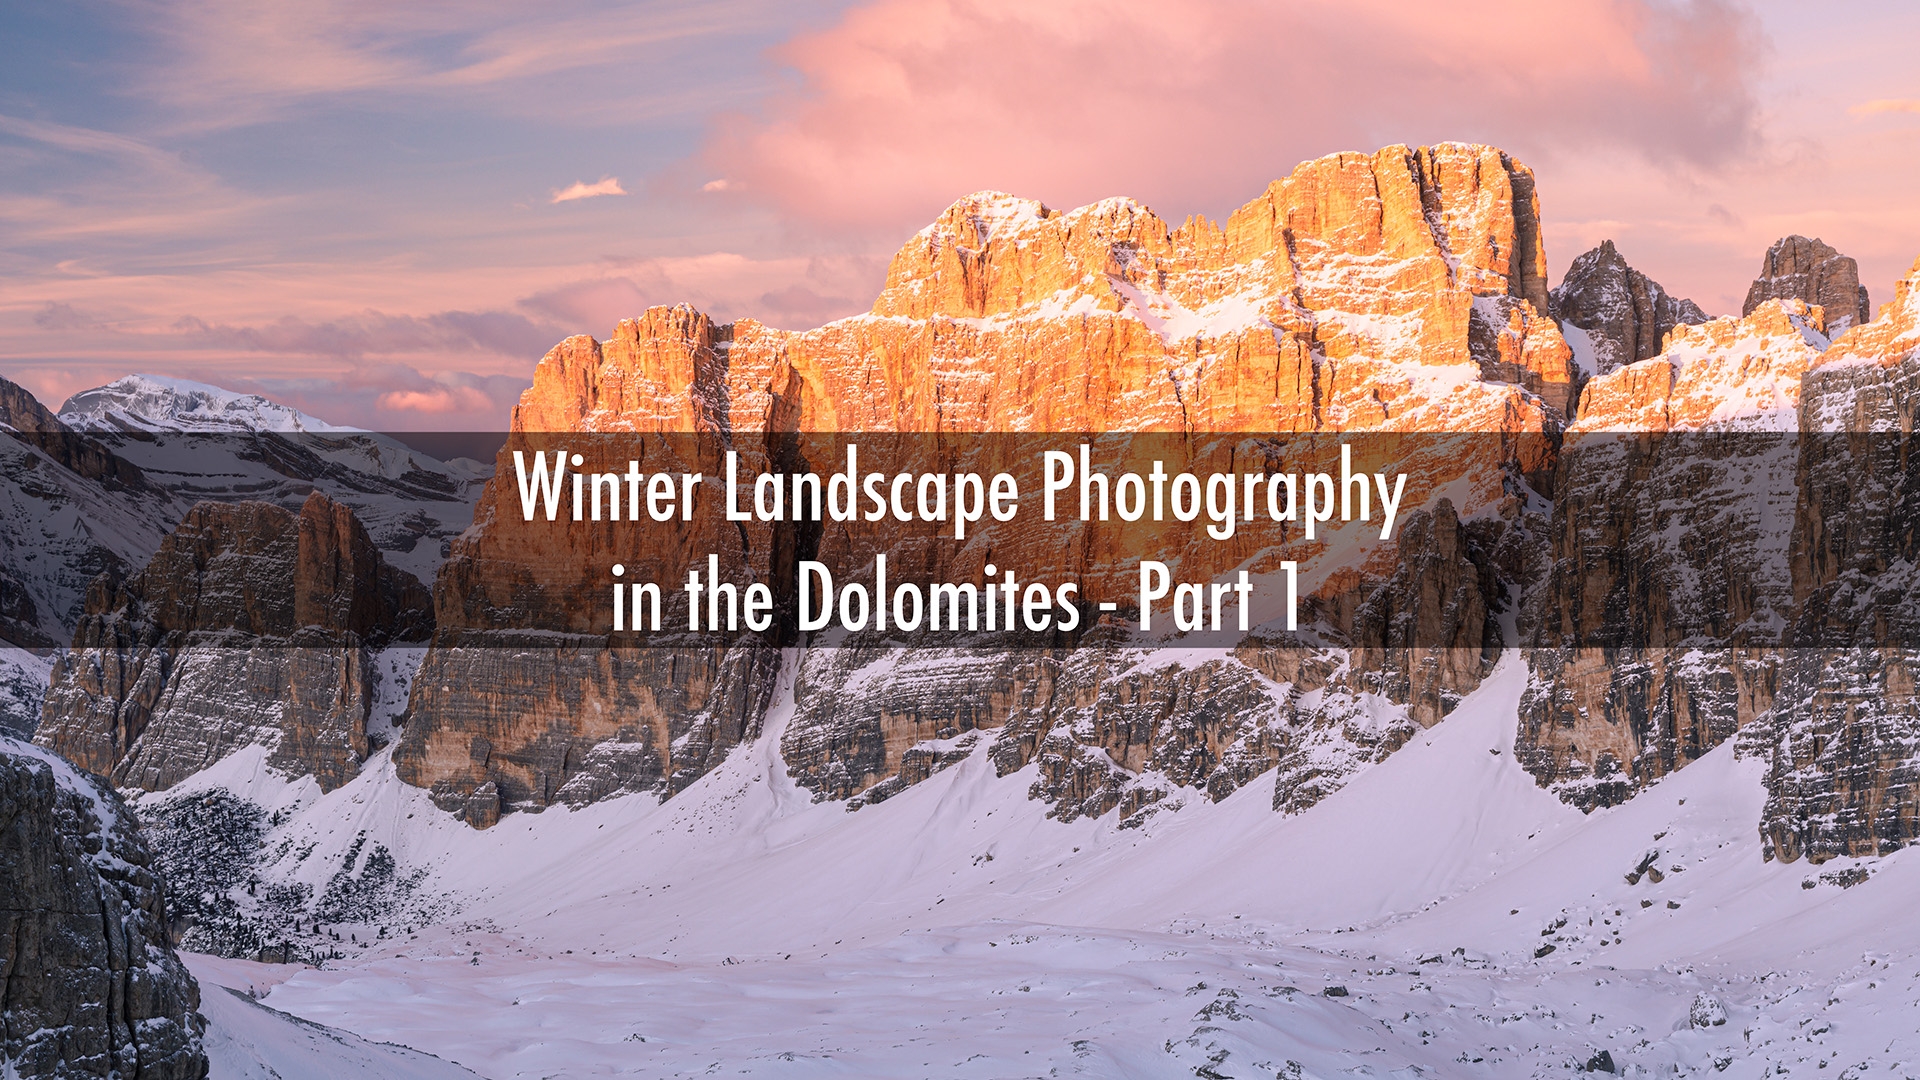 Winter landscape photography in the Dolomites. Part 1. Italy.